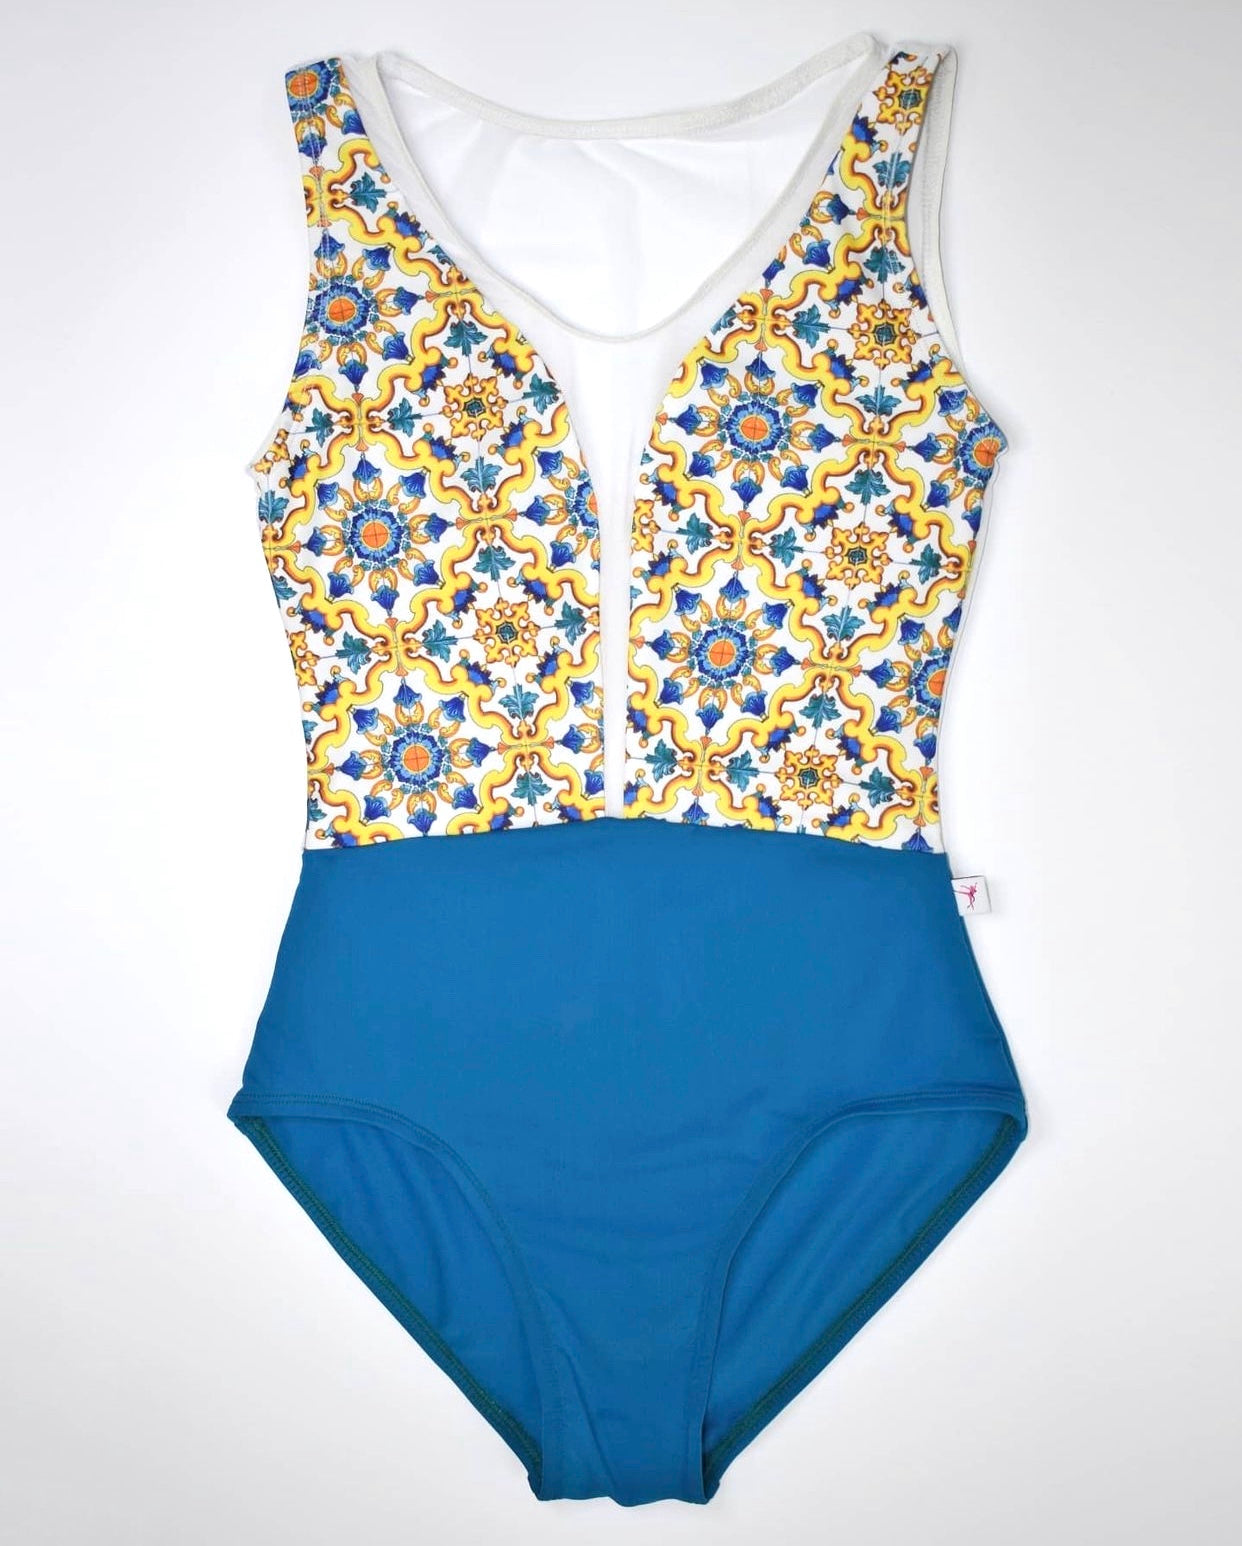 passione ballet dance leotard with pattern vietri sul mare from sole dancewear sold by Thev Collective Dancewear 